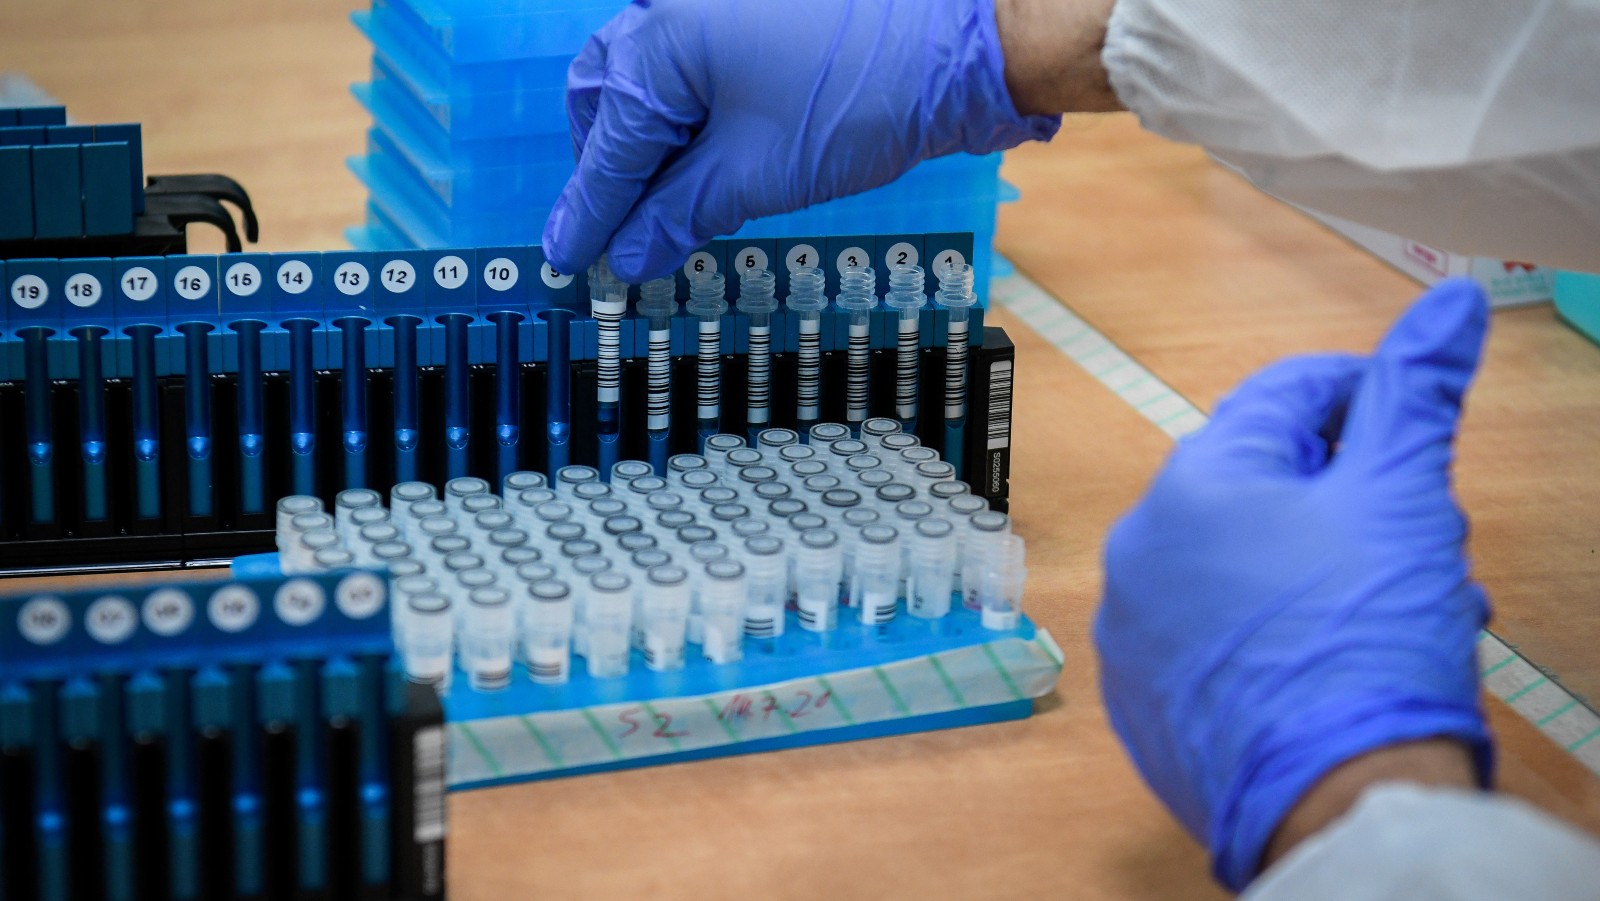 Testing for coronavirus in a IDF lab in Israel. Photo by Yossi Zeliger/FLASH90